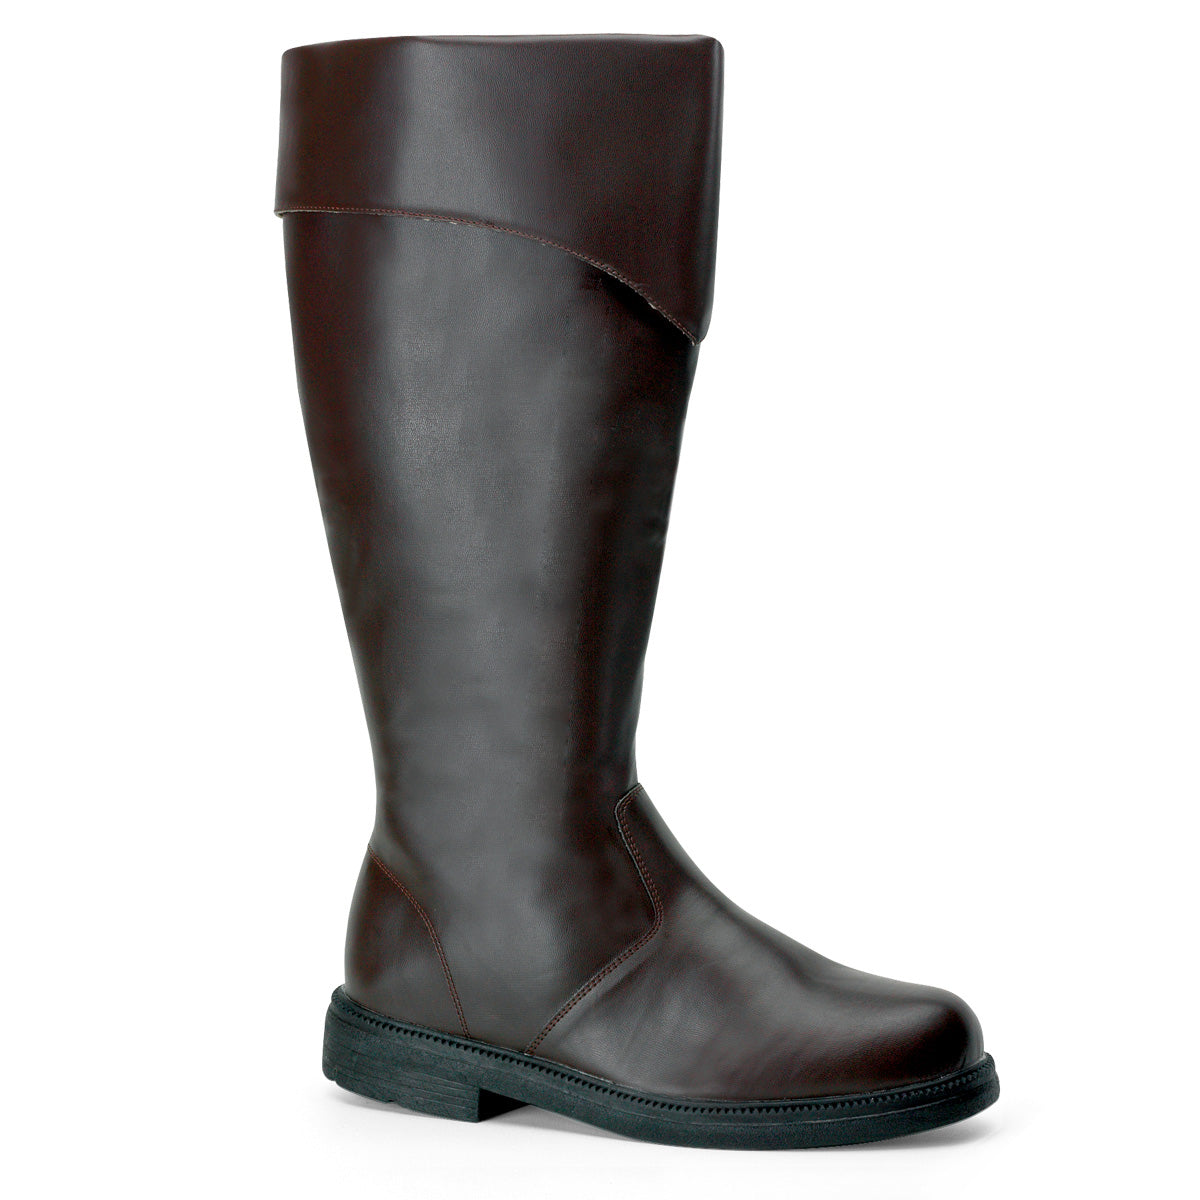 CAPTAIN-105 Brown Pu Knee Boots